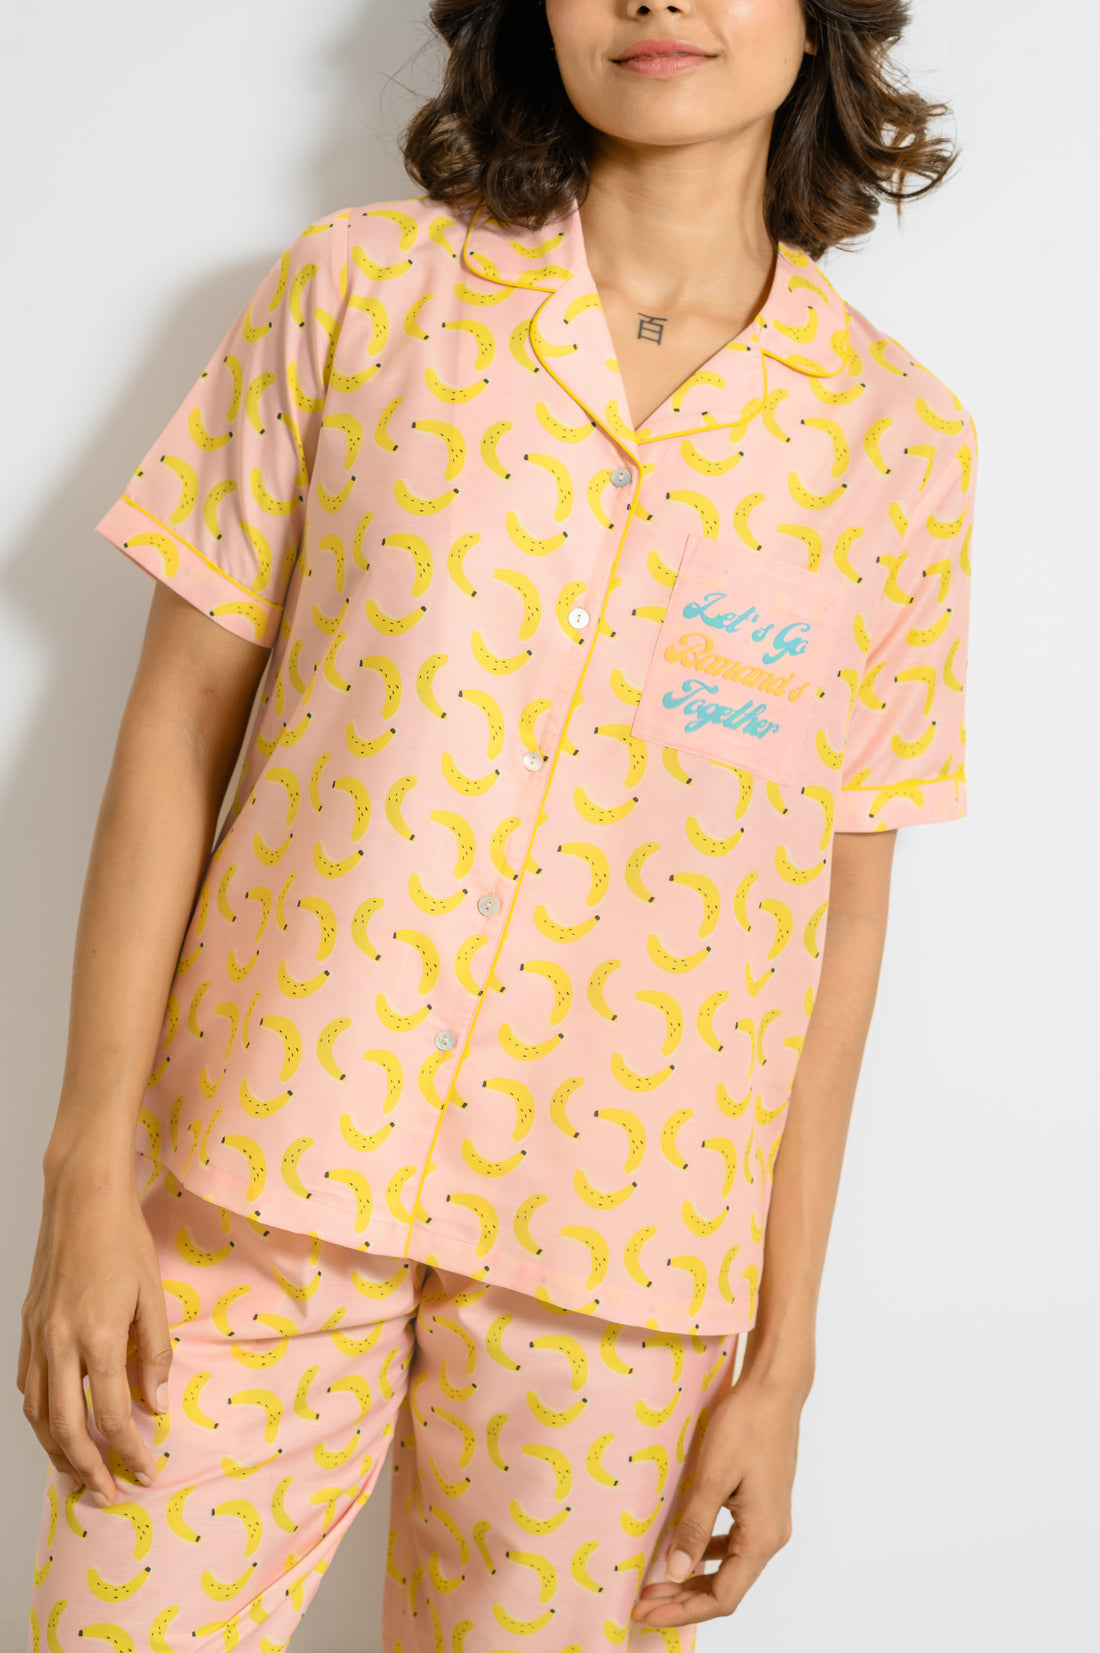 Baby Pink Banana Print Night Suit: Let's Go Bananas Together